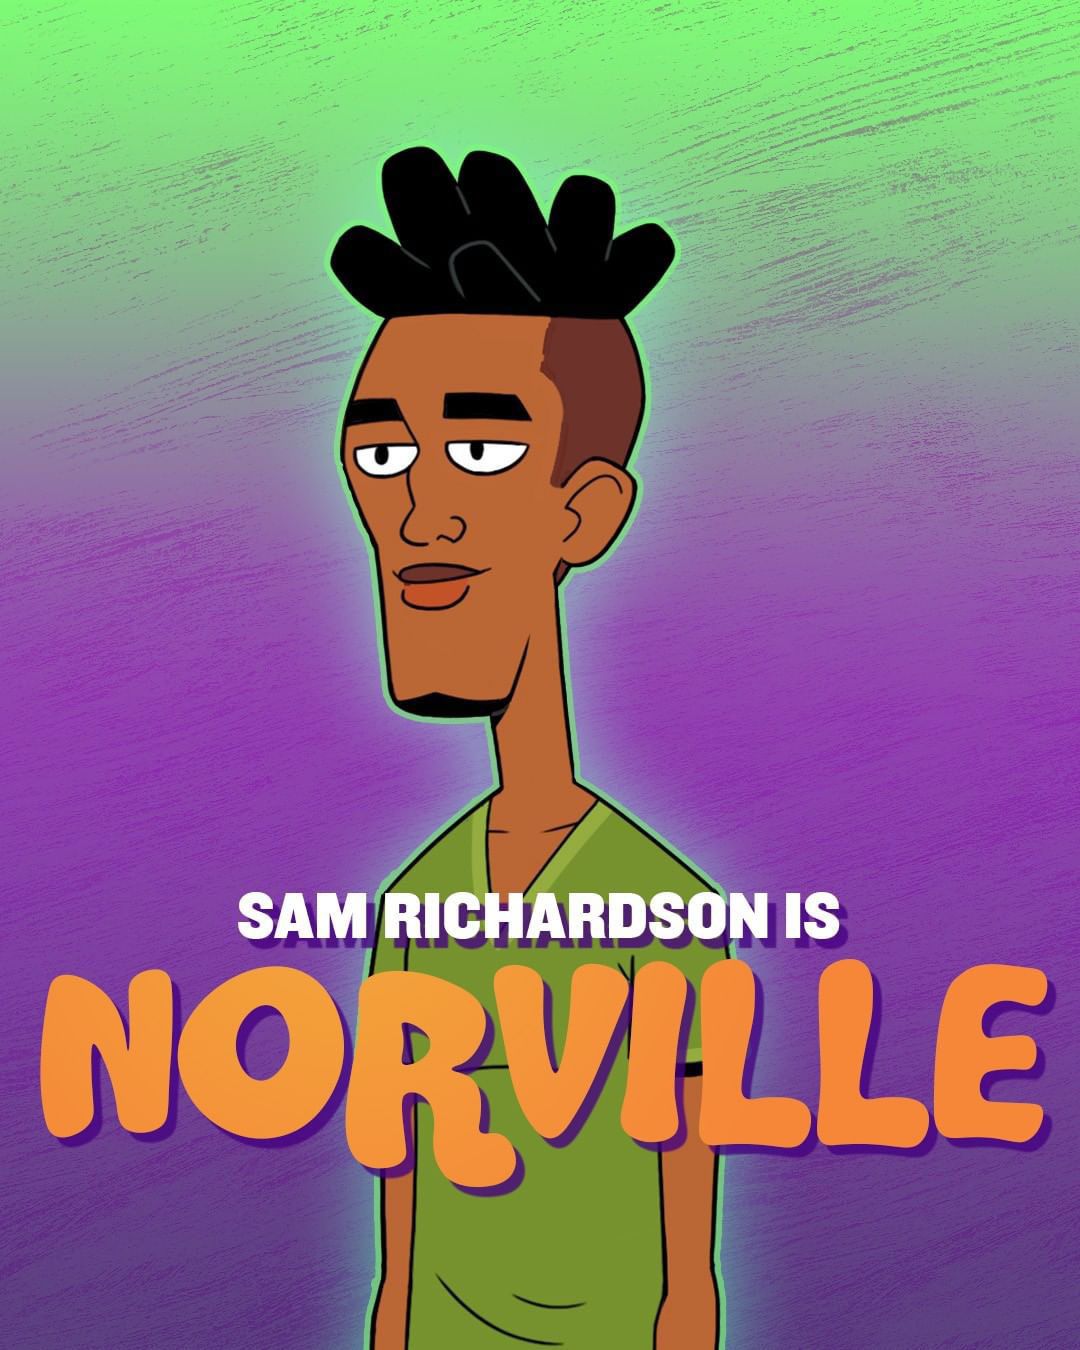 Norville aka Shaggy, a Black man with spiky hair and a soul patch, dressed in a green shirt 